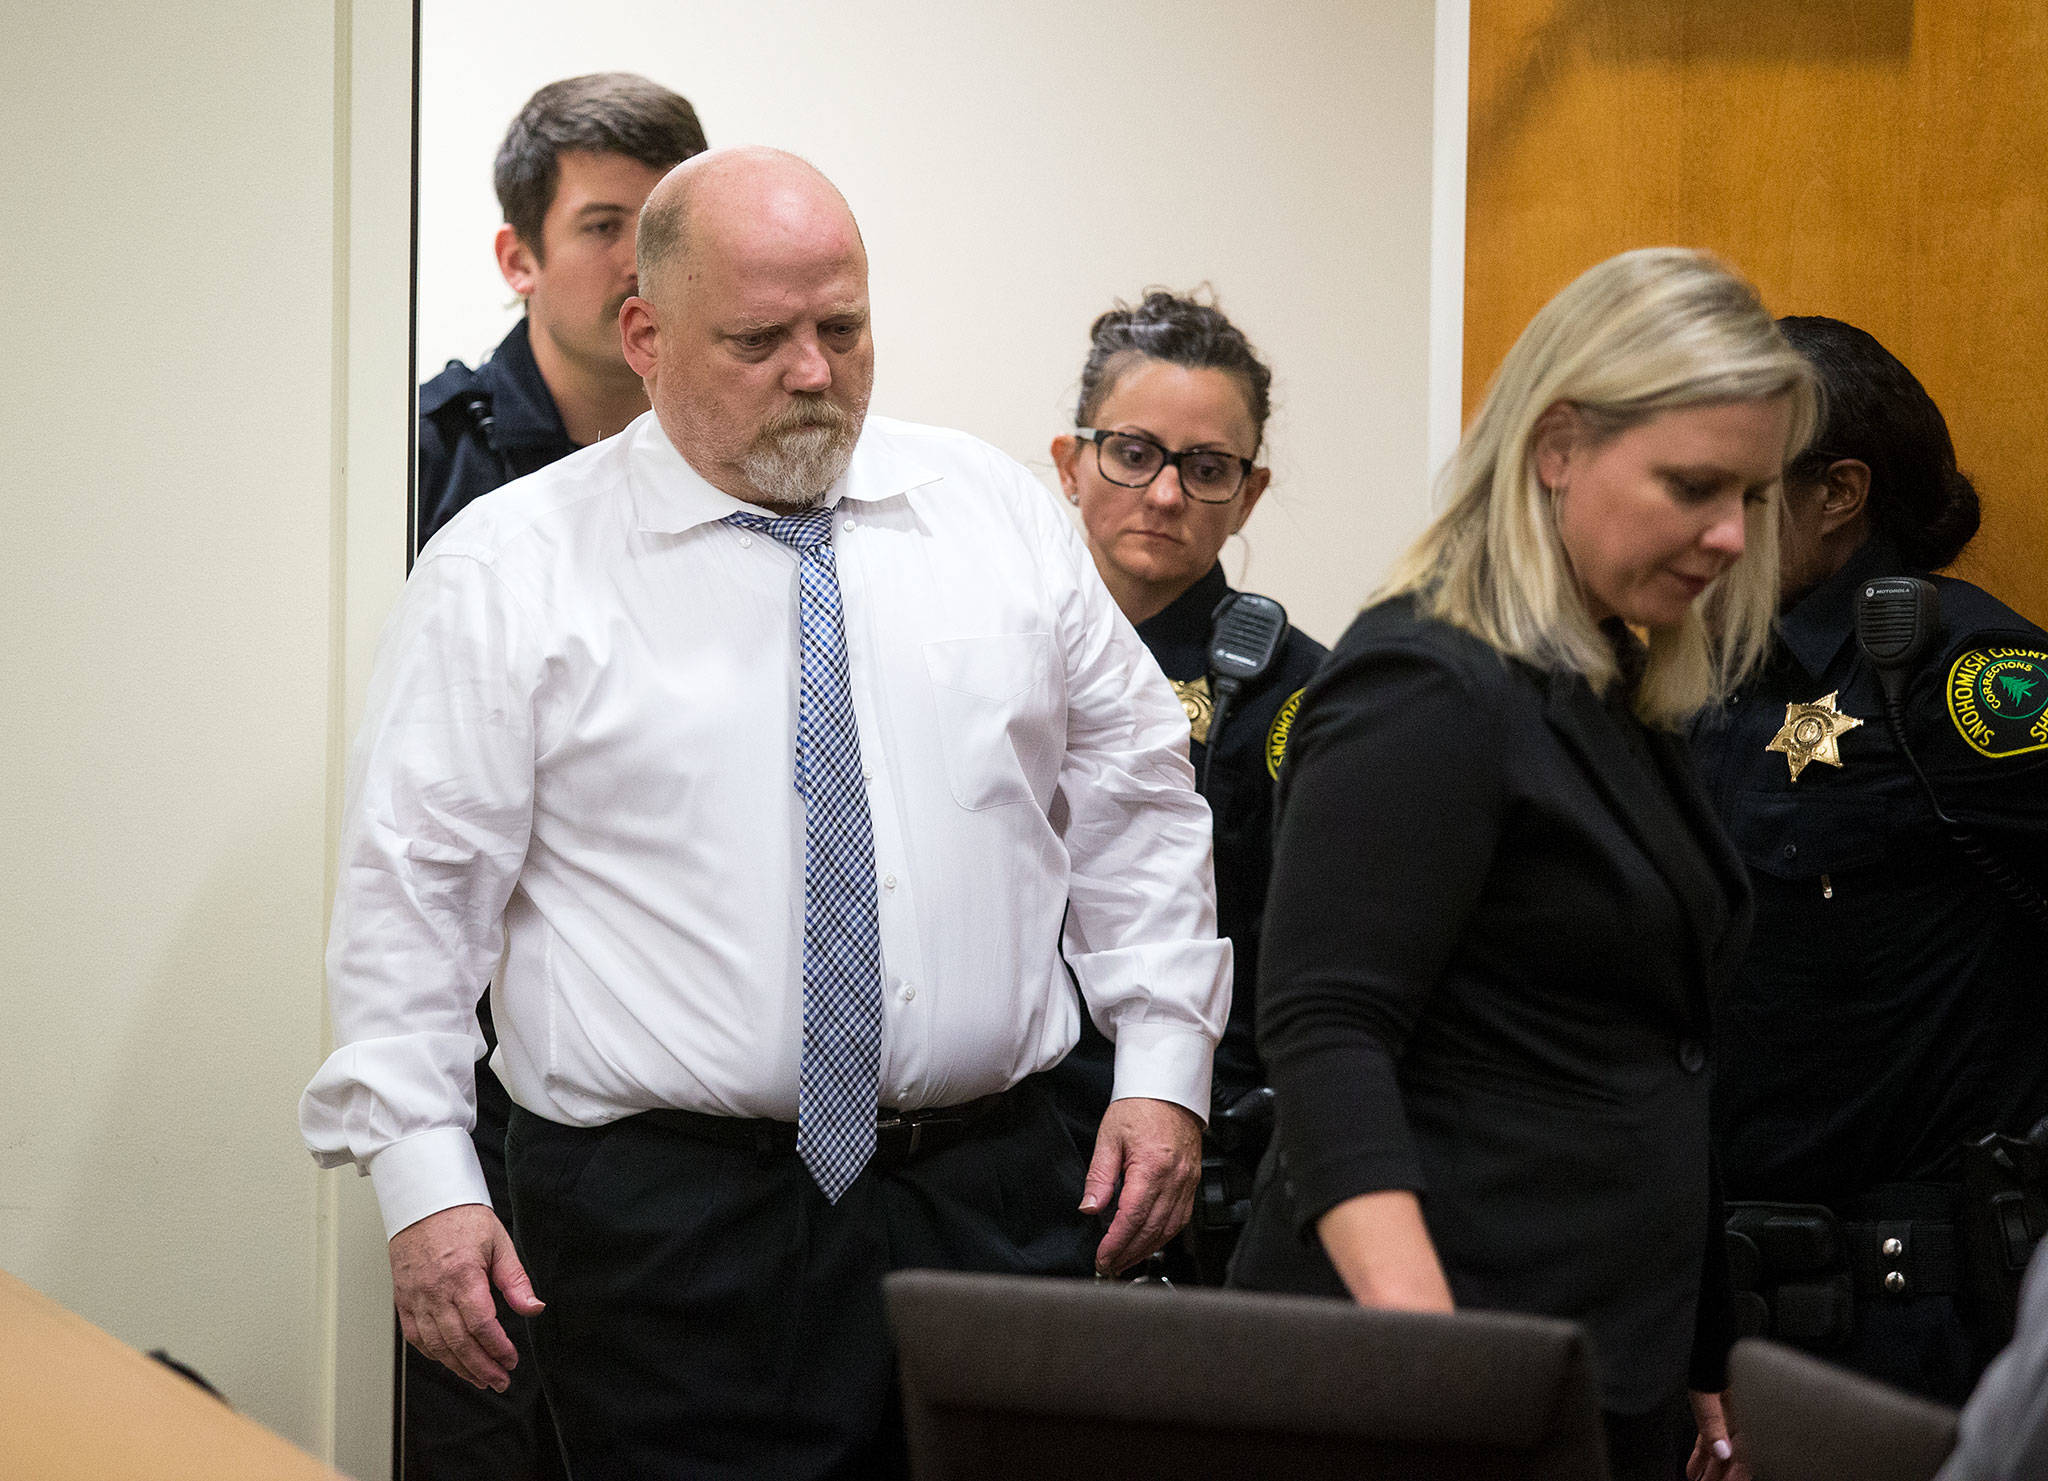 Led by defense attorney Rachel Forde, William Earl Talbott II enters Snohomish County Superior Court on Tuesday in Everett to be arraigned for the 1987 murders of Jay Cook, 20, and Tanya Van Cuylenborg, 18. (Andy Bronson / The Herald)